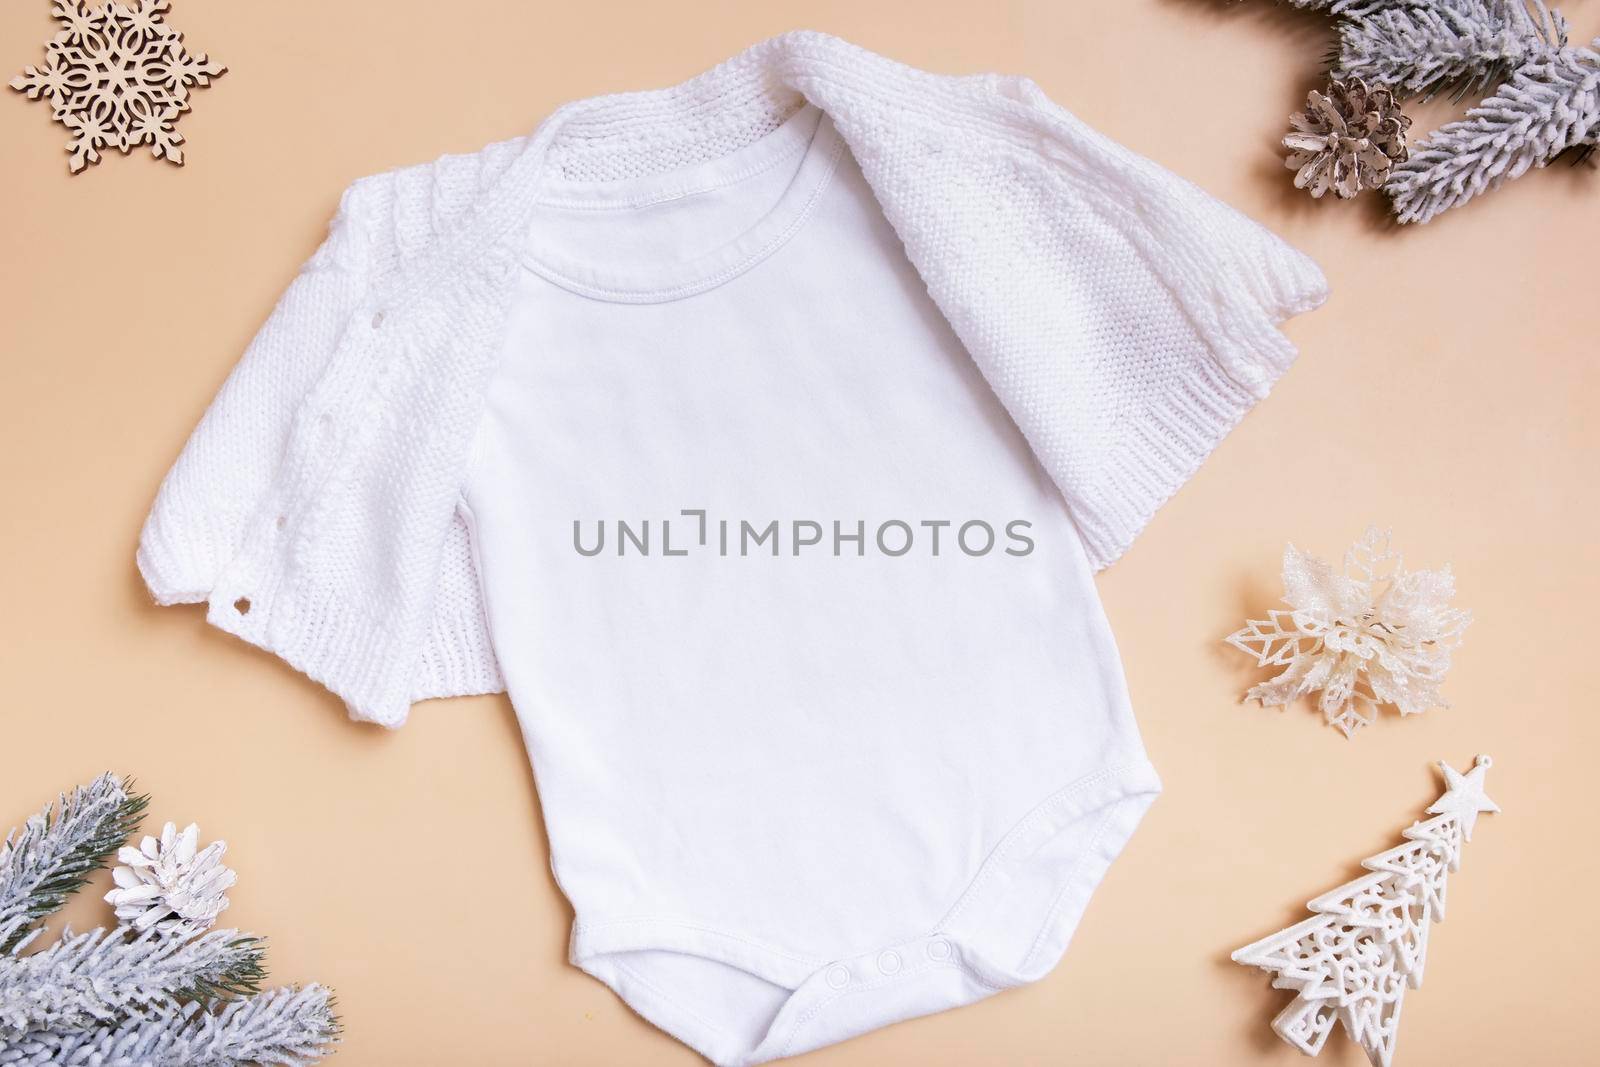 White baby bodysuit with sweater mockup for logo, text or design on beige background with winter decotations top view by ssvimaliss